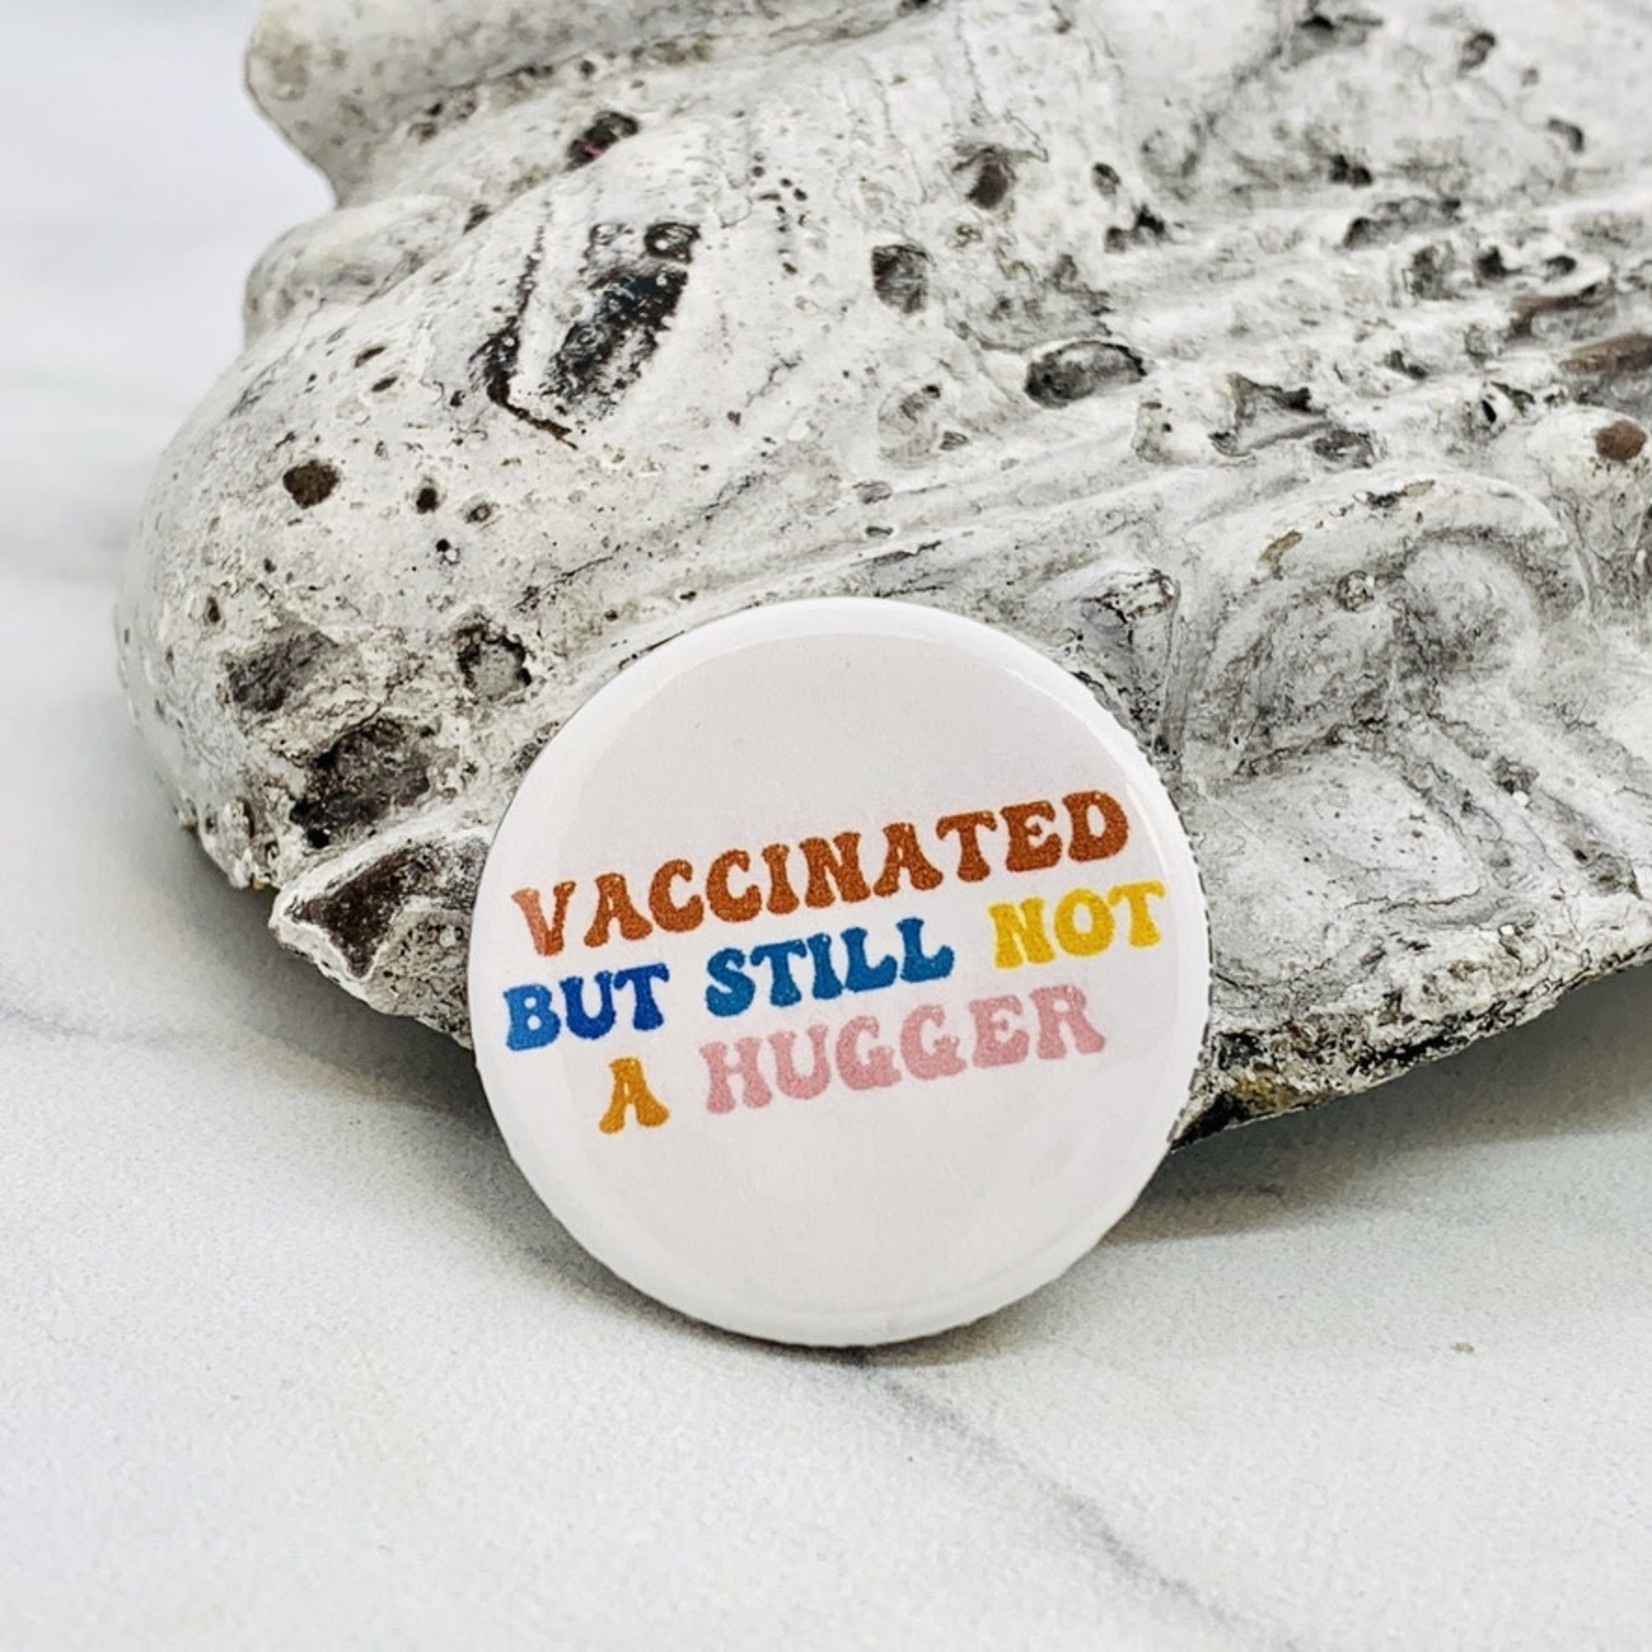 Flair City Supply Co Vaccinated but Still Not A Hugger Pin